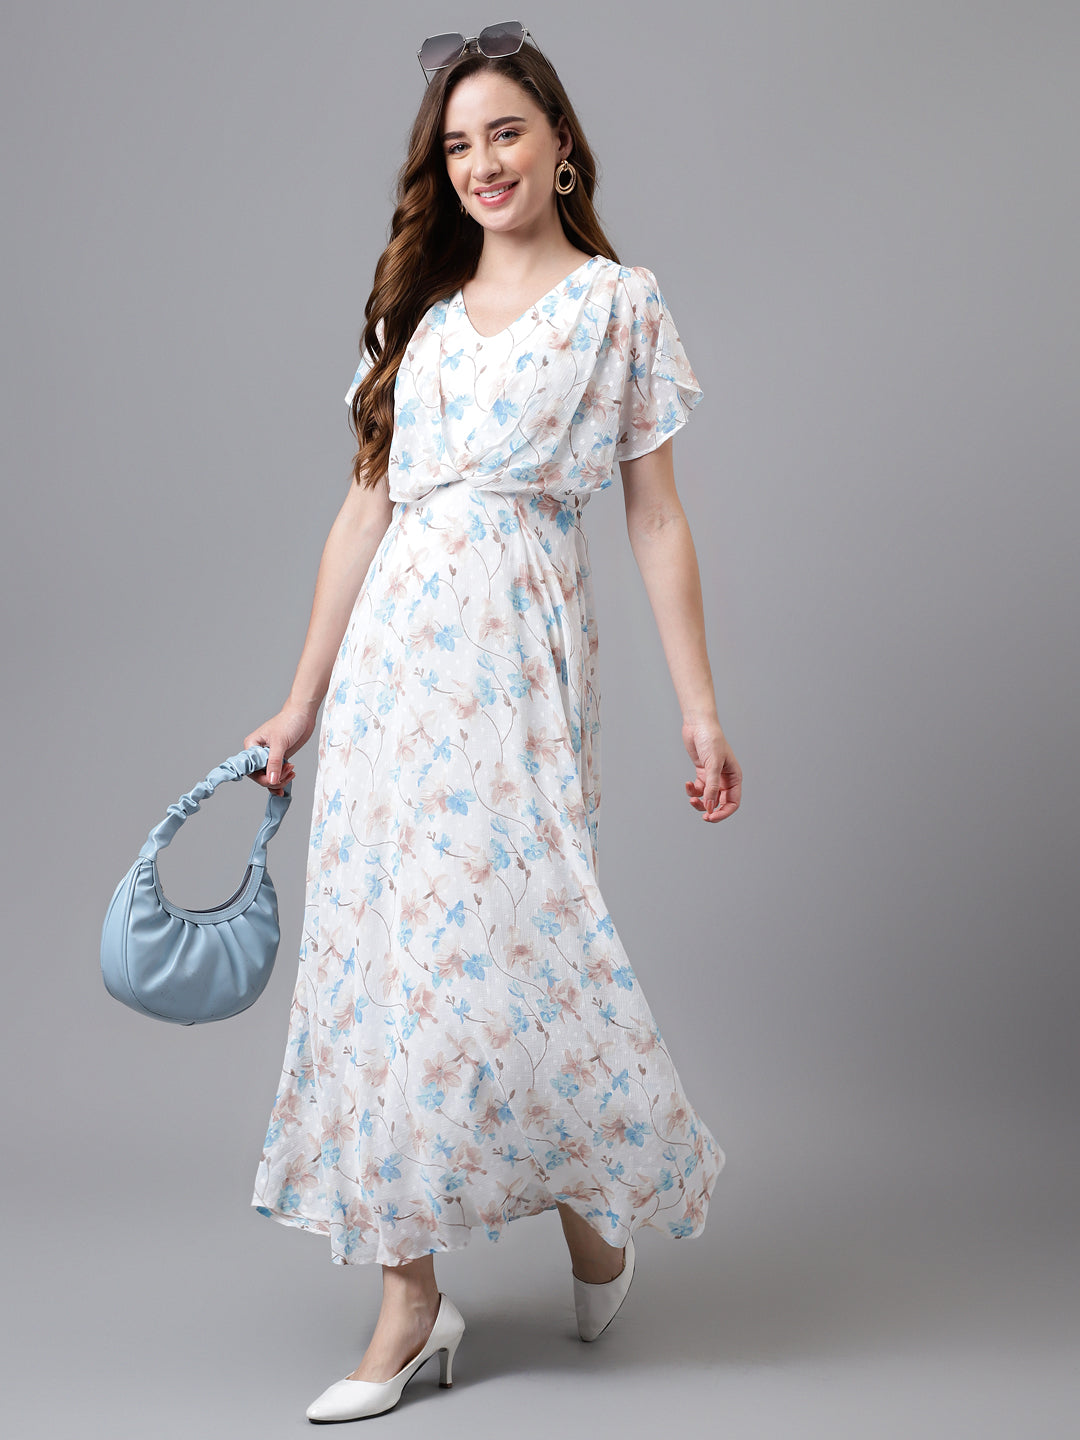 Blue Cap Sleeve V-Neck Printed Women Maxi Dress For Party